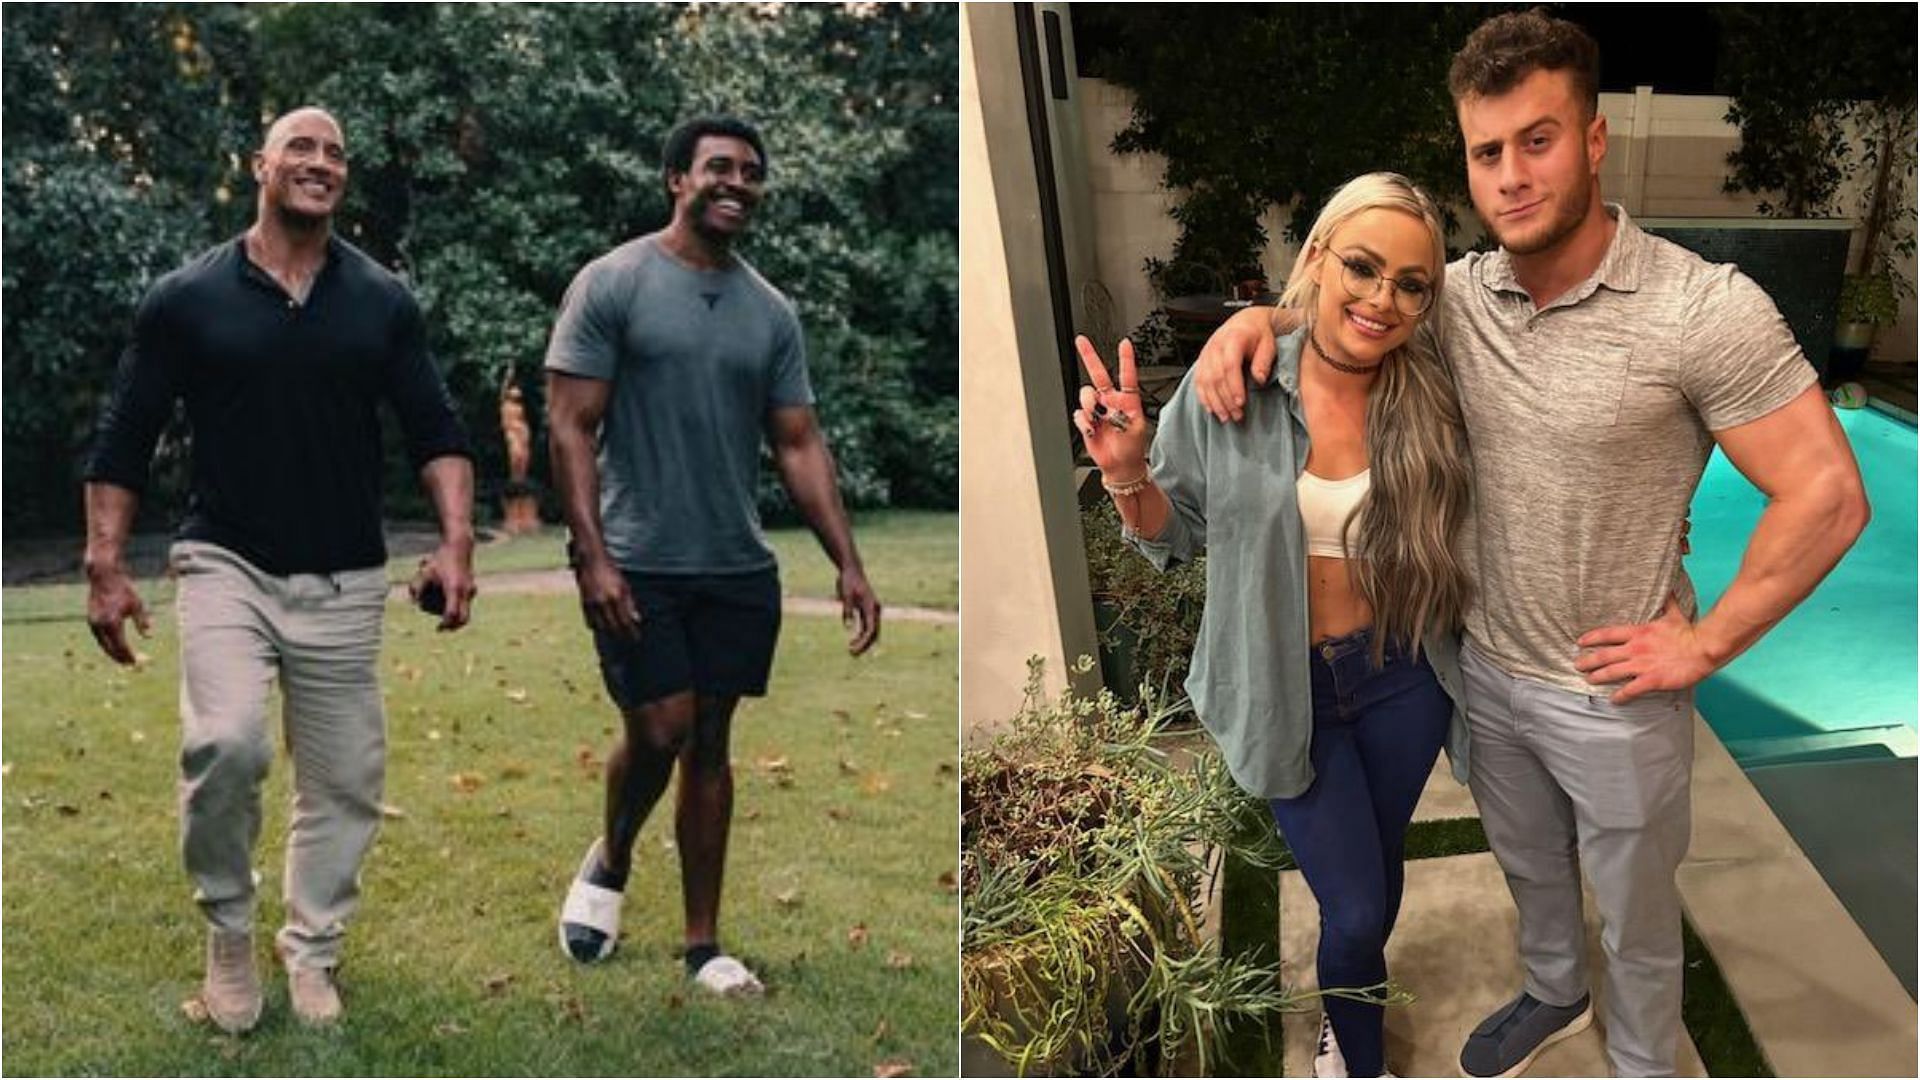 WWE Superstars were very active on social media this past week